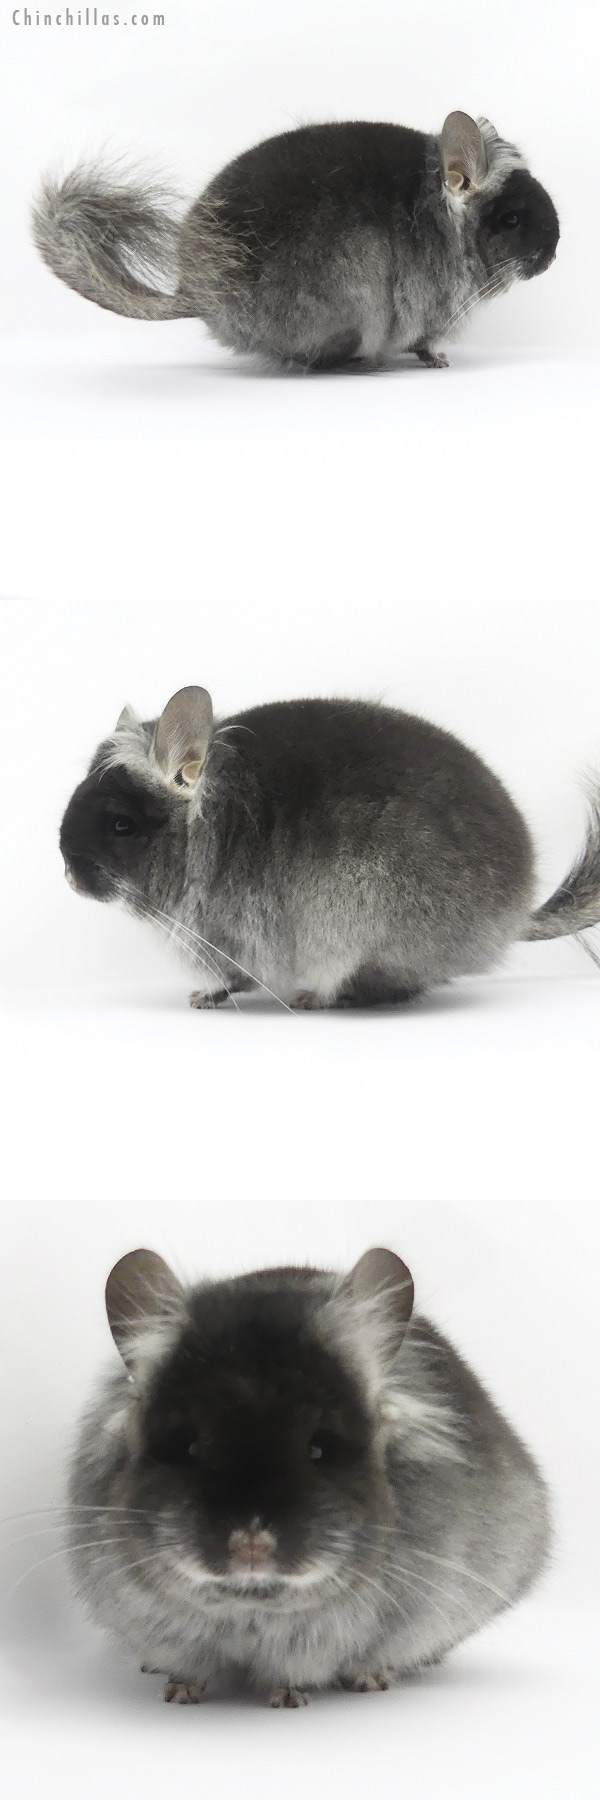 Chinchilla or related item offered for sale or export on Chinchillas.com - 19395 Brevi Type Black Velvet  Royal Persian Angora Female Chinchilla with Ear Tufts